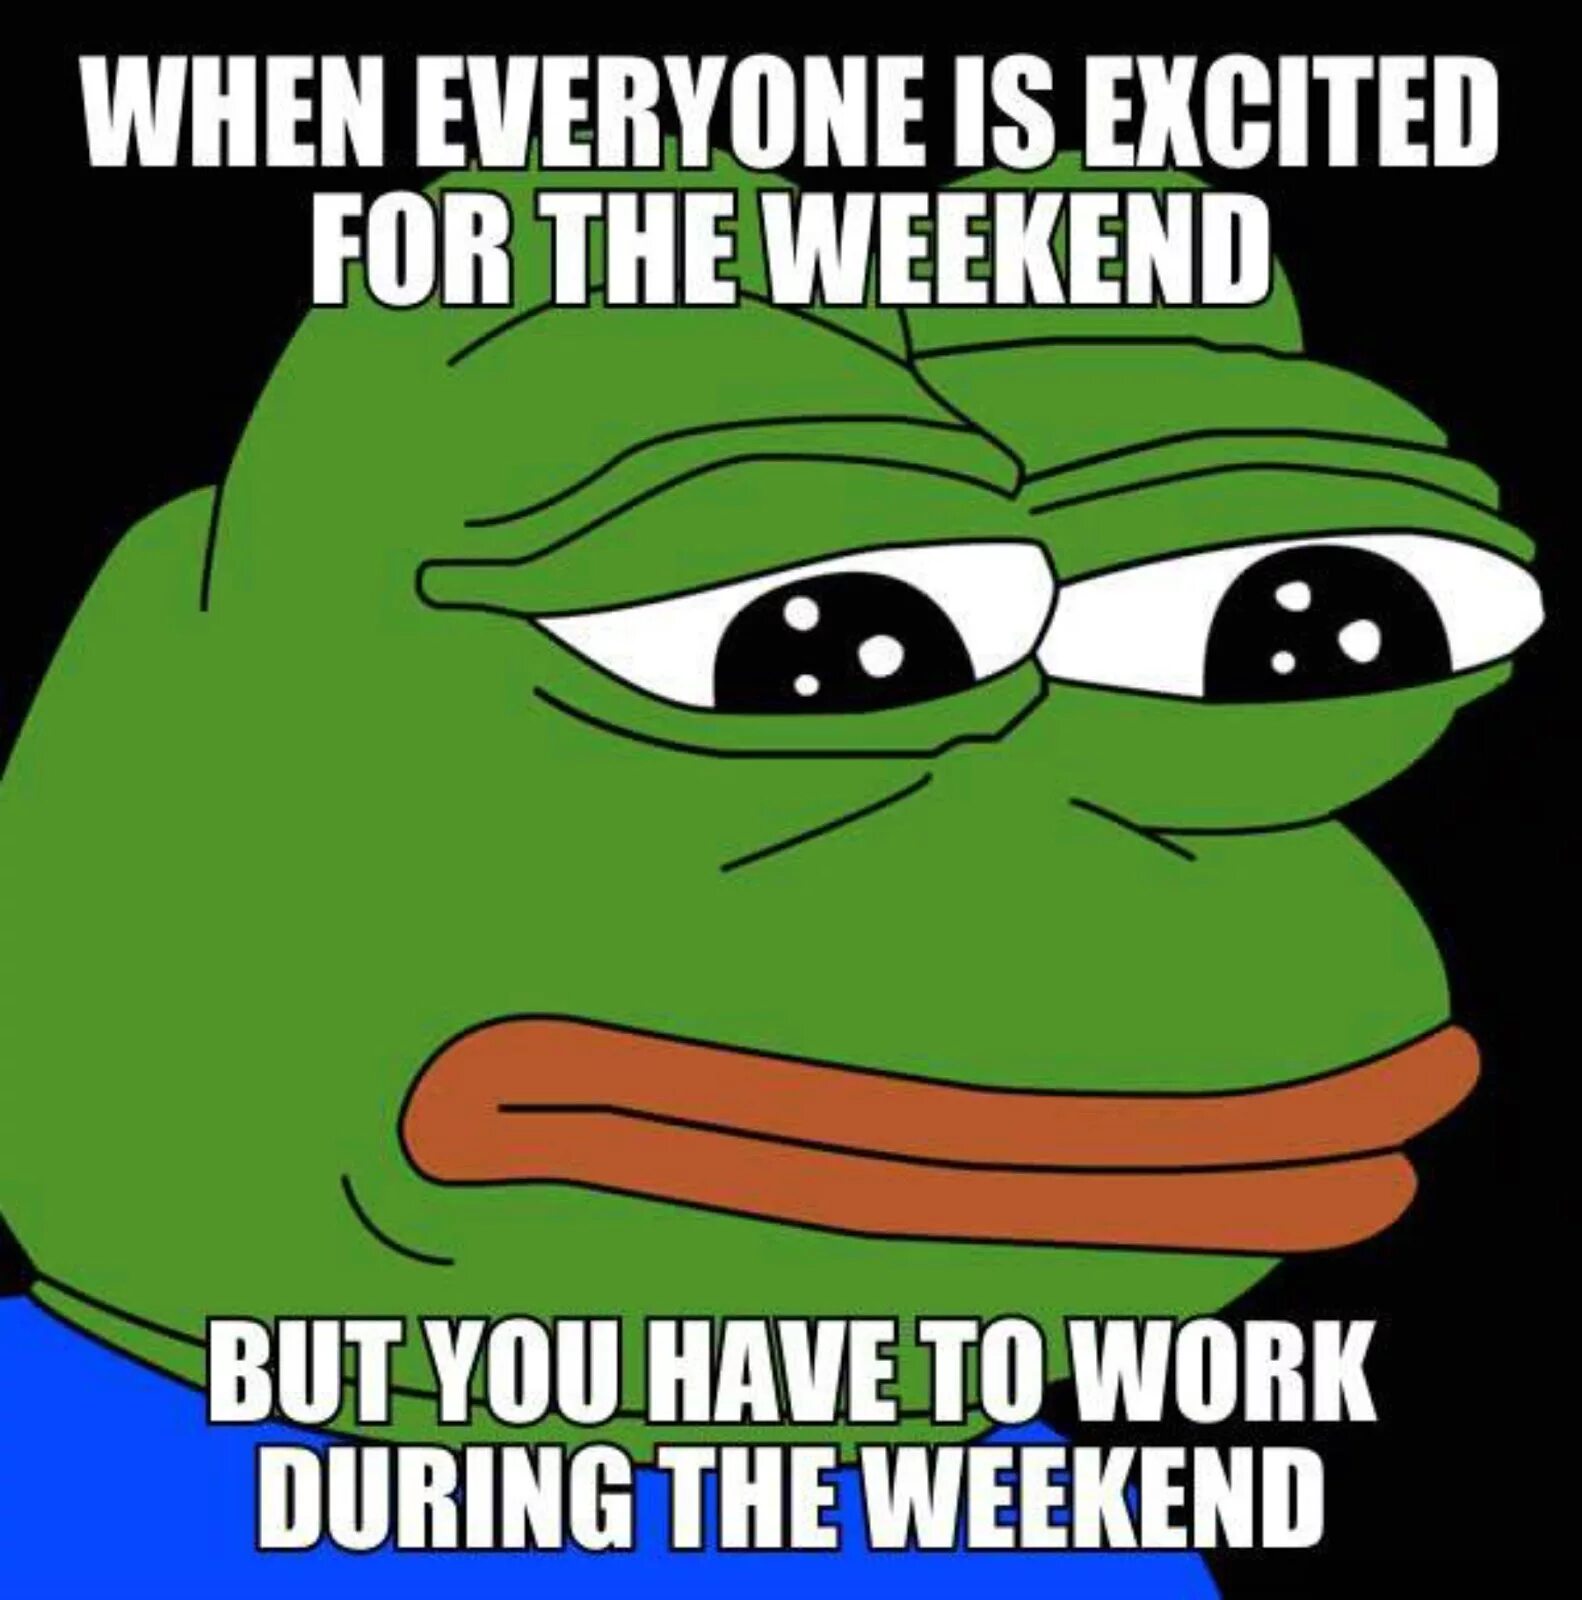 When weekend comes. Working for the weekend. When everyone. When weekend comes Мем. Working on weekend.